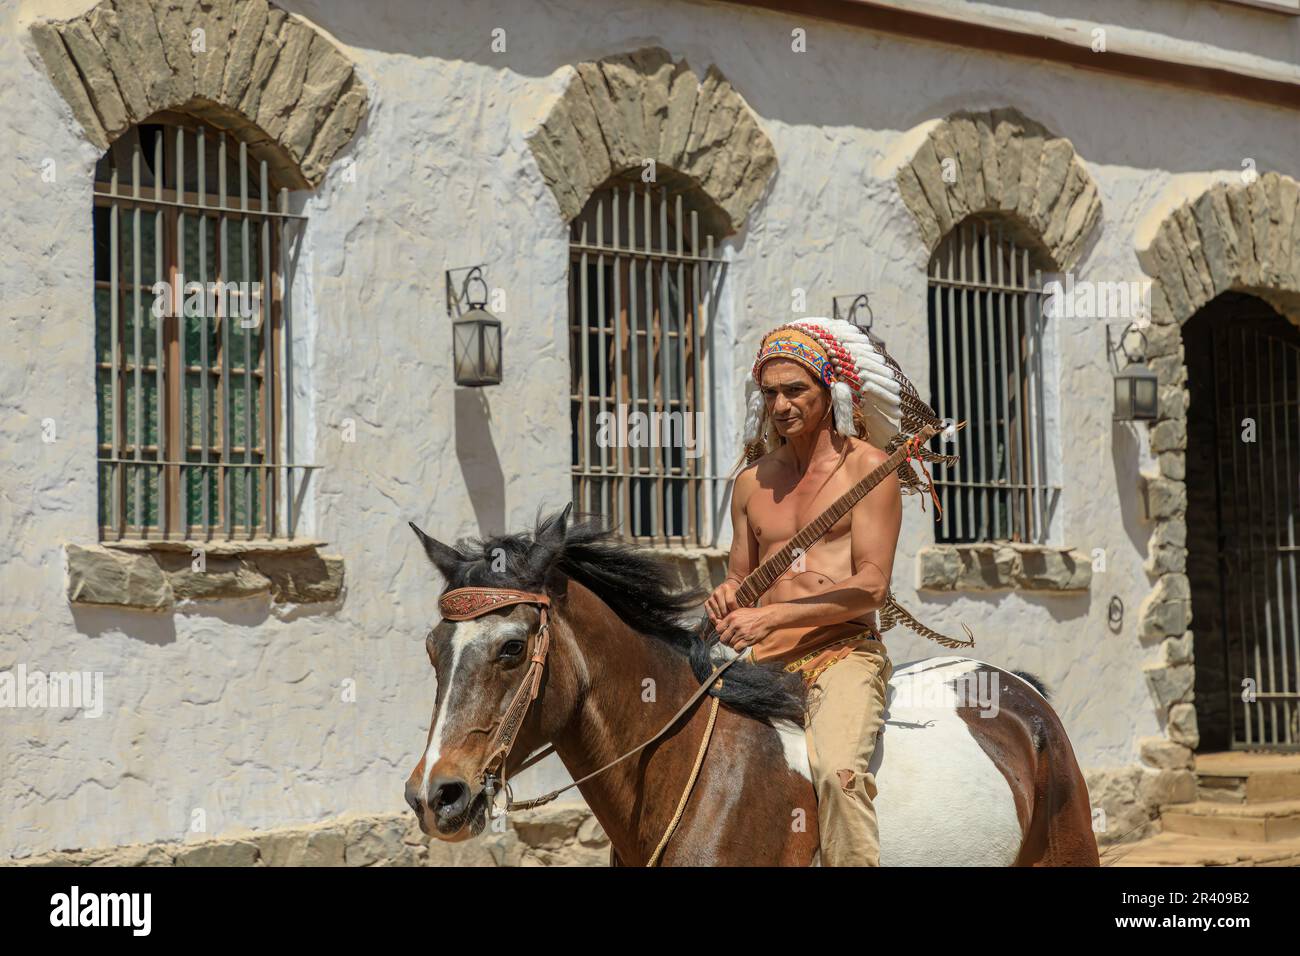 The Wild West lives on in southern Spain